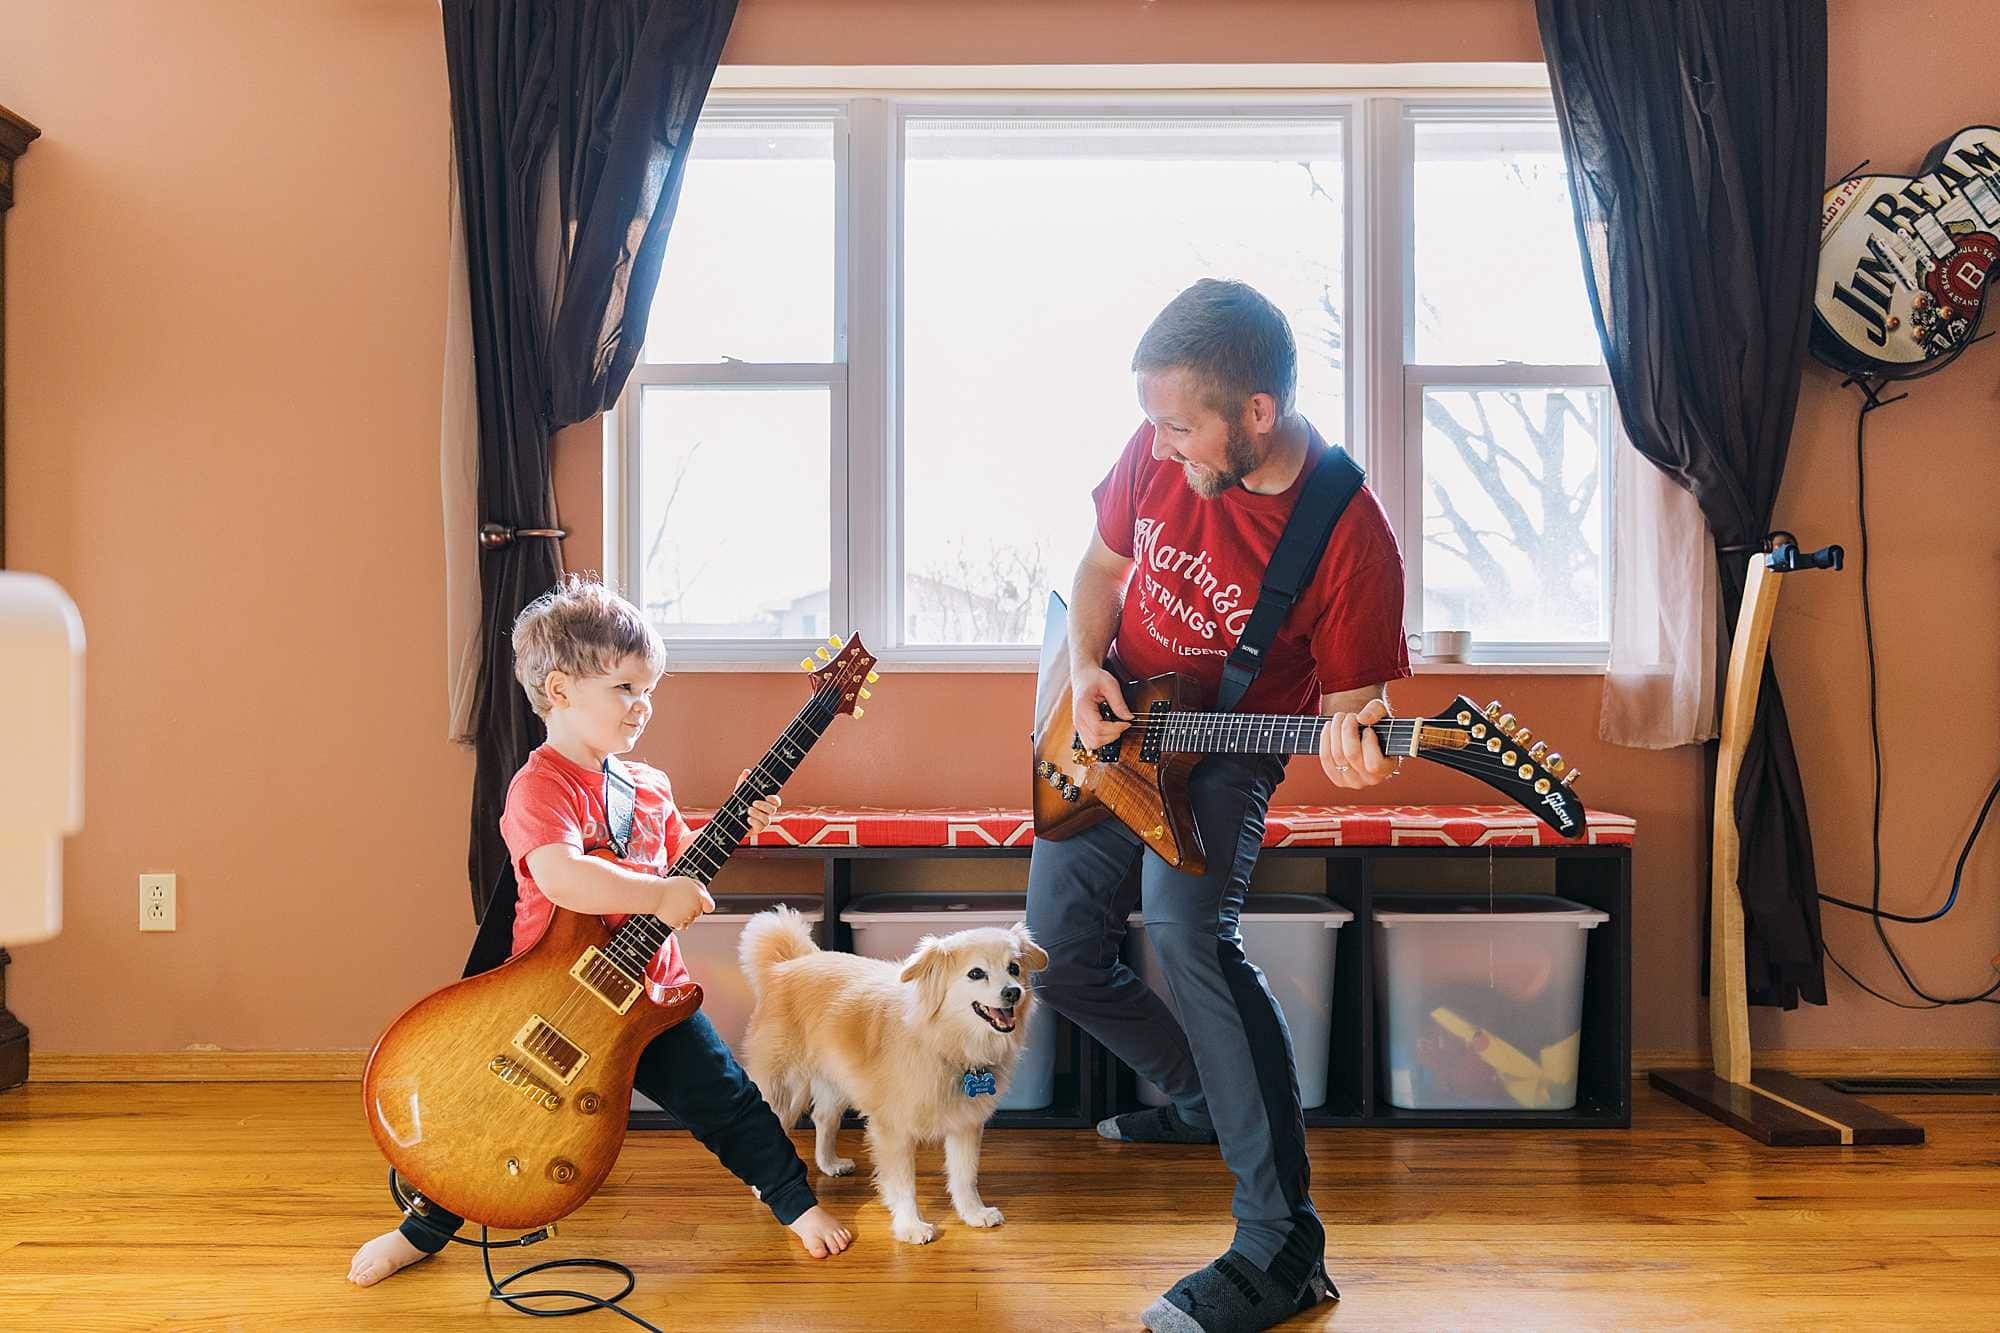 Coledyn plays electric guitar with his dad in front of a big living room window in their home in Columbus Ohio